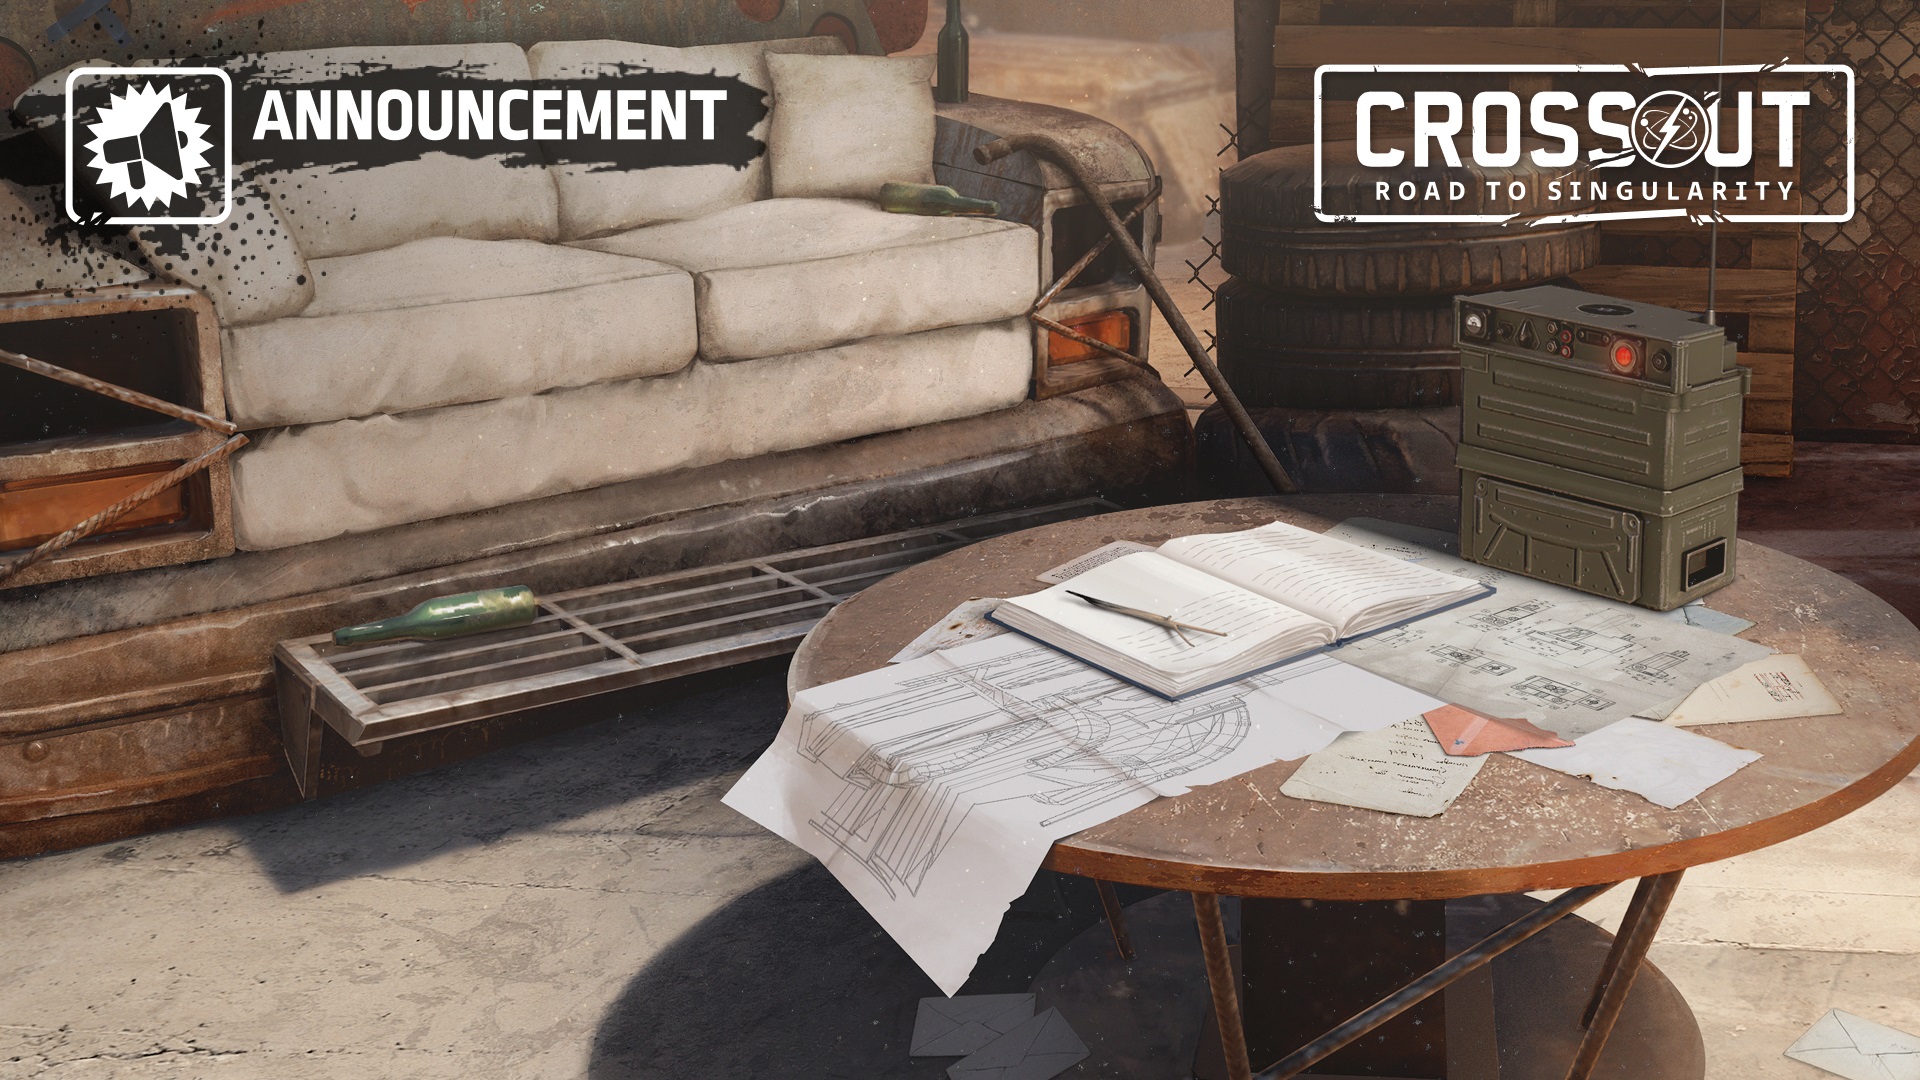 Recruitment of volunteers for the Discord server - News - Crossout